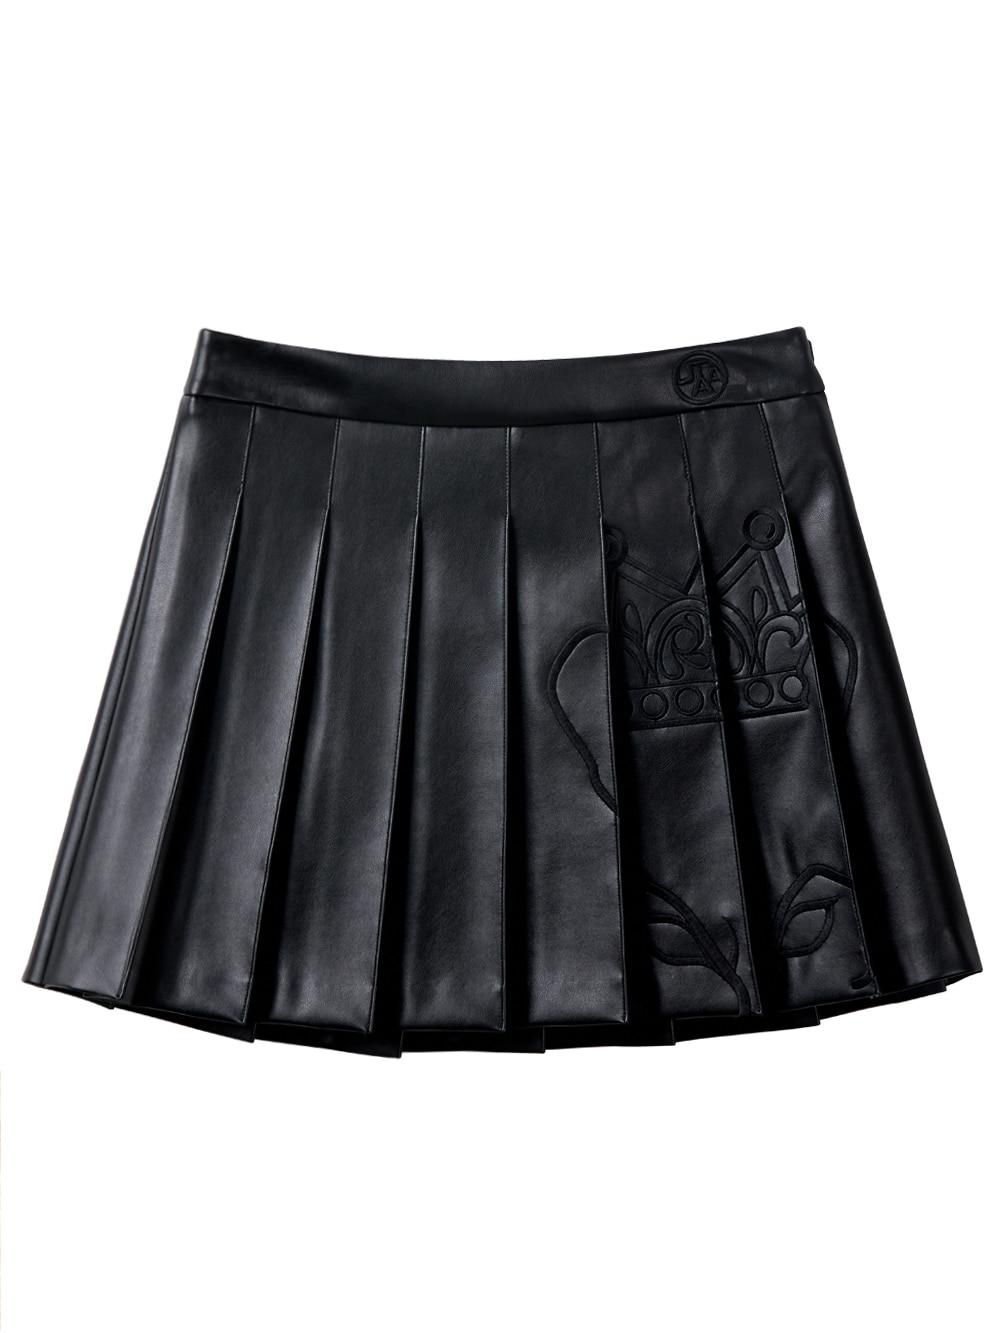 UTAA Glossy Poly Leather Crown Panther Skirt (UB1SKF160BK)